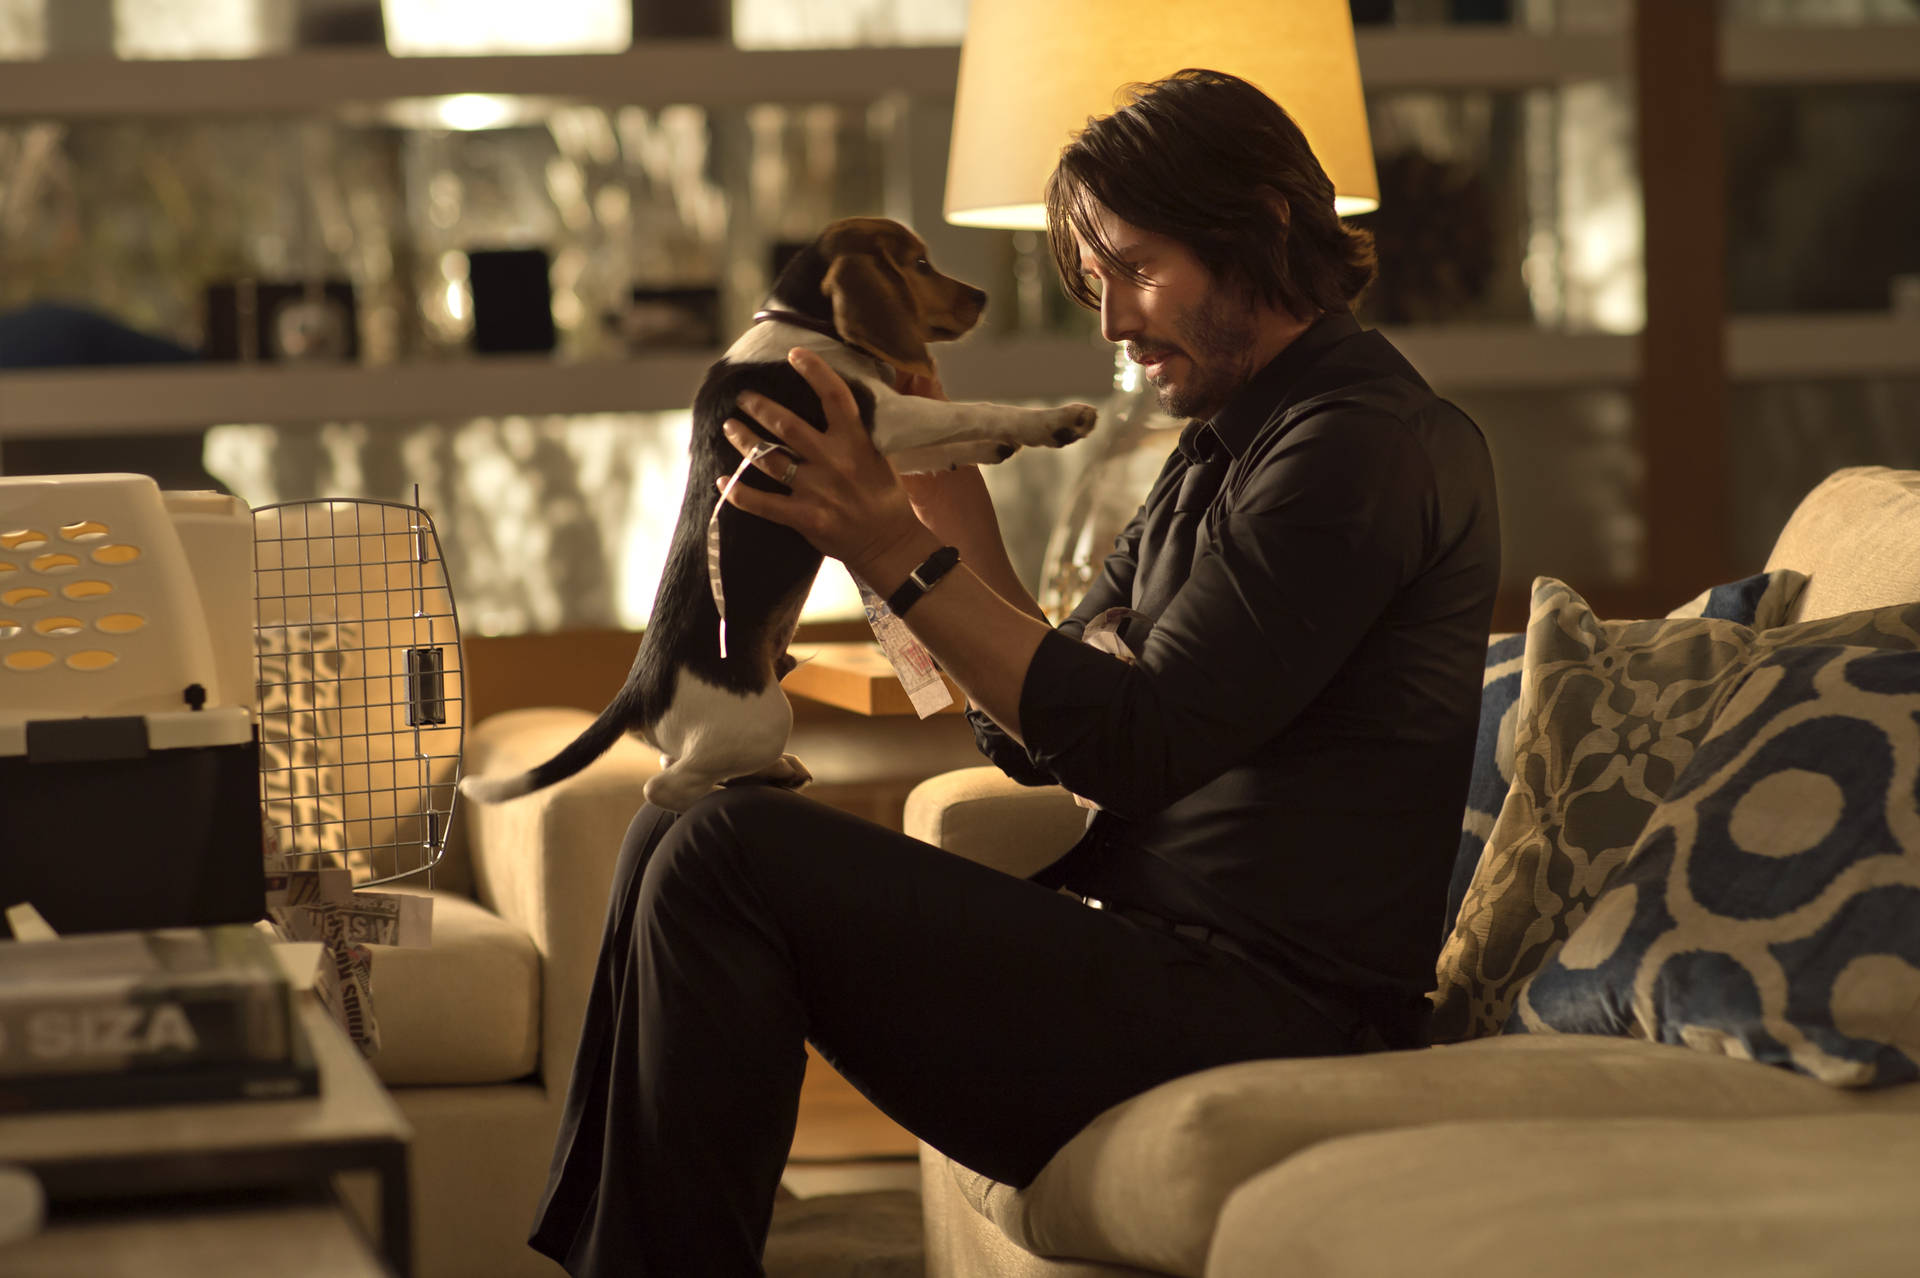 John Wick 6144X4089 Wallpaper and Background Image